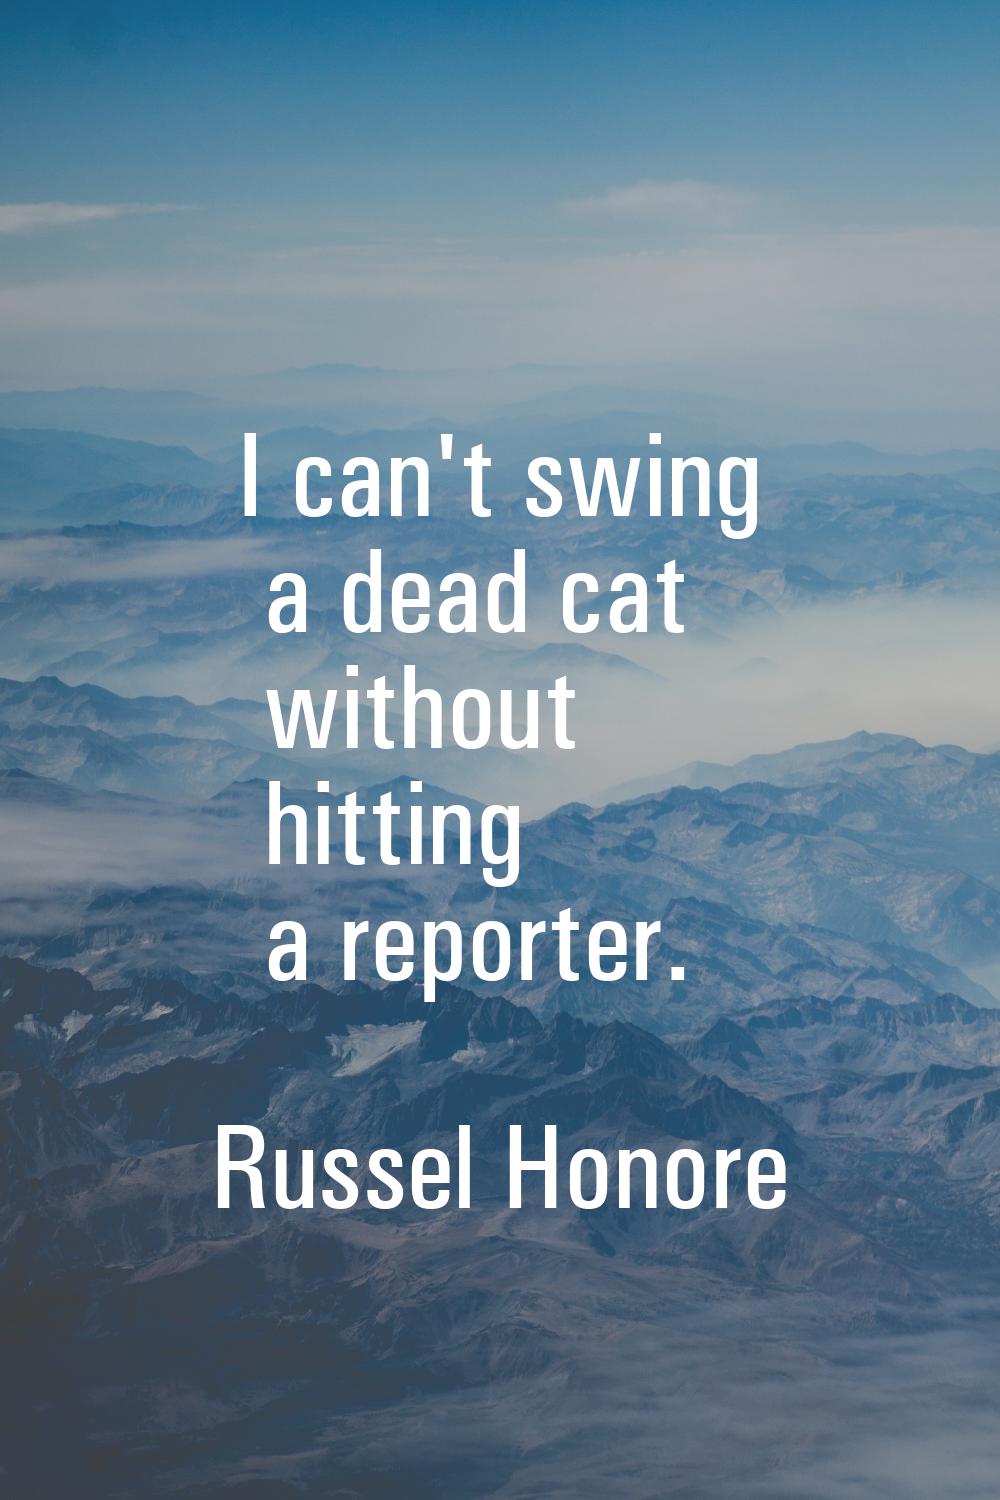 I can't swing a dead cat without hitting a reporter.